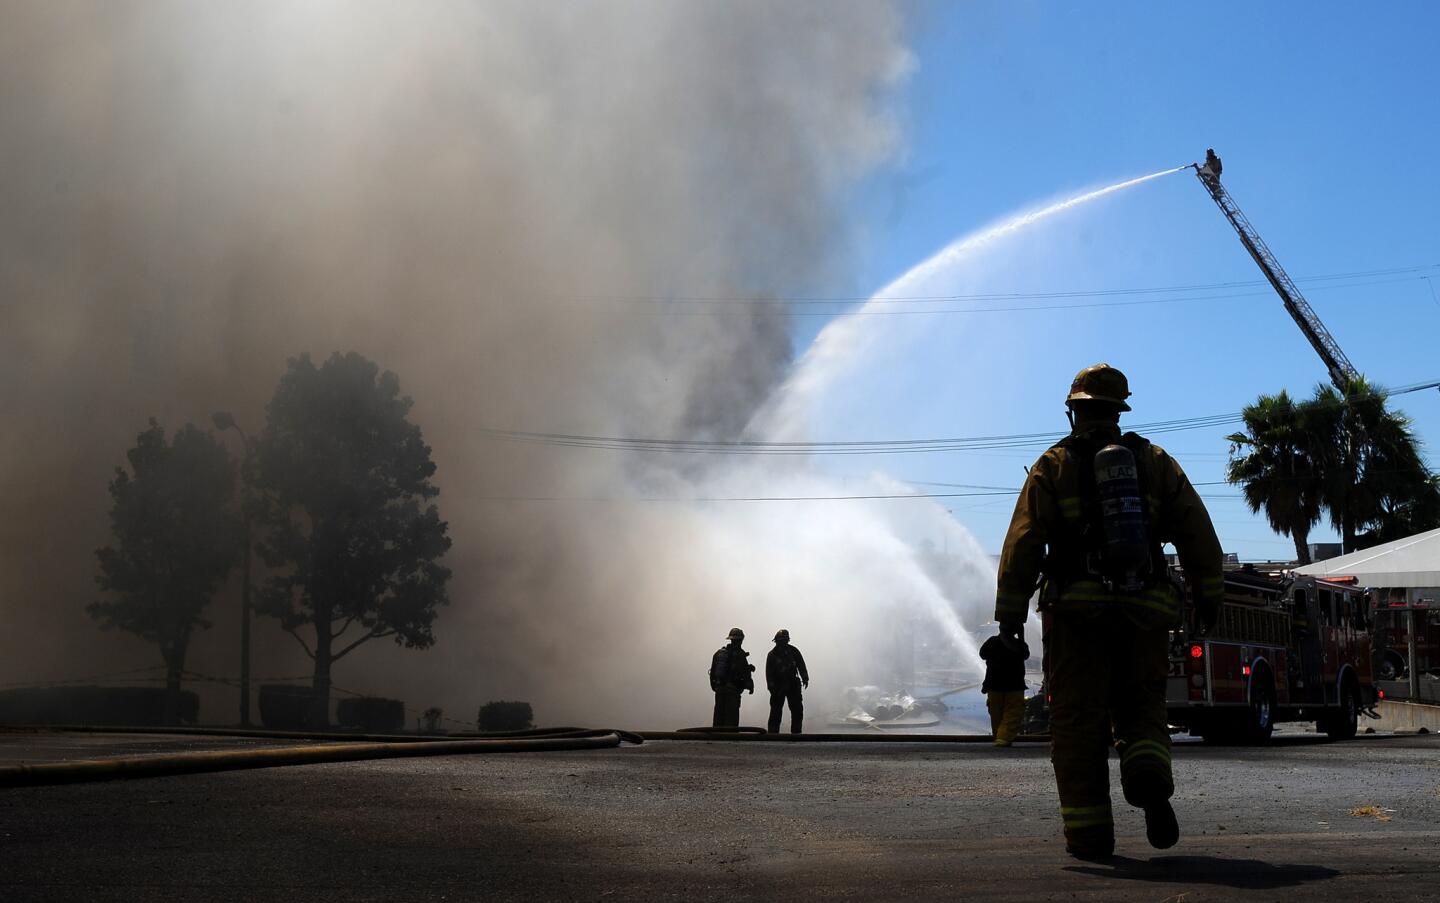 Firefighters battle a fire at the Animo South Los Angeles Charter High School along Western Ave. Tuesday afternoon.